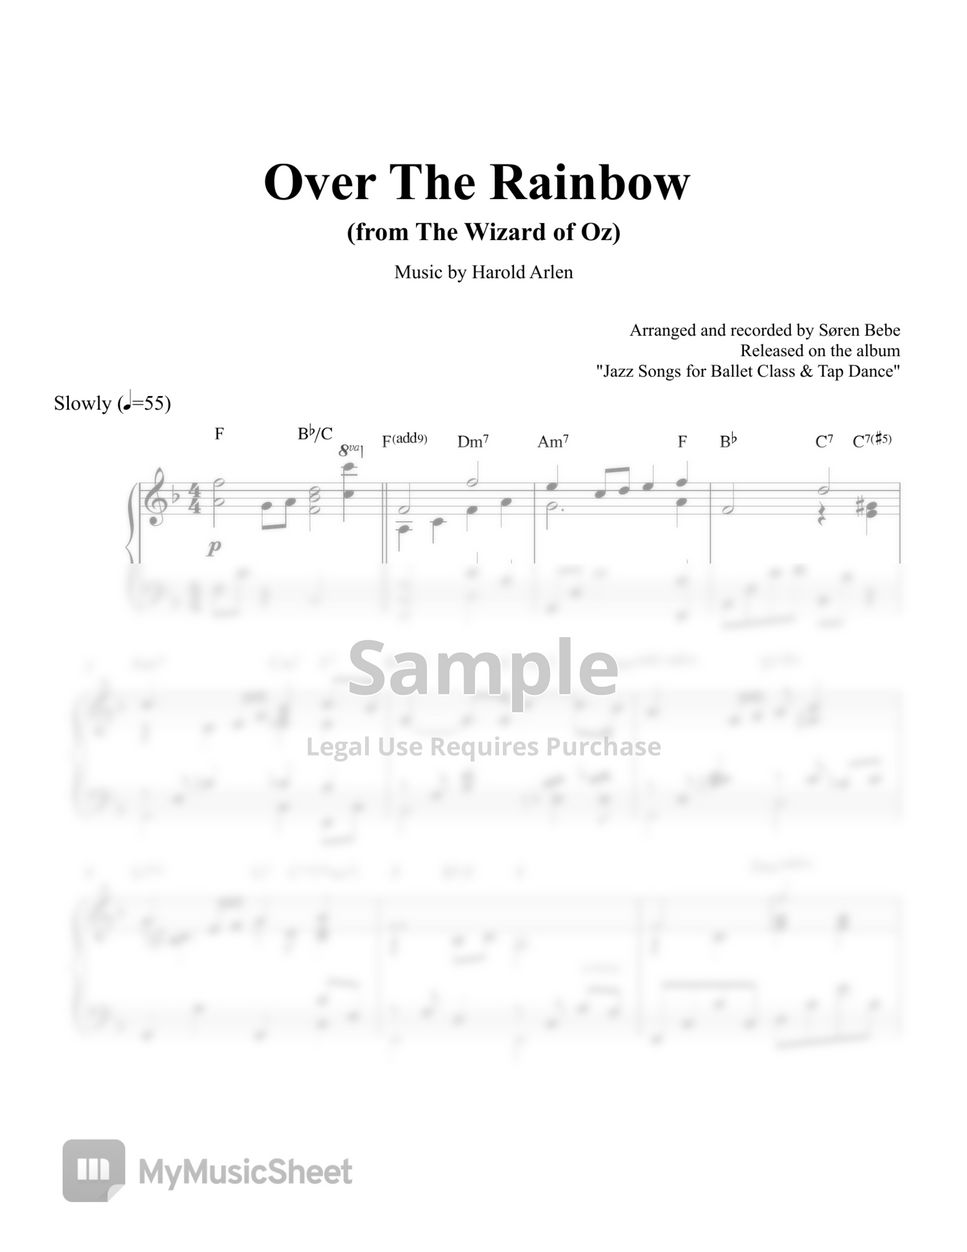 Harold Arlen - Over the Rainbow (from The Wizard of Oz) - Solo Piano